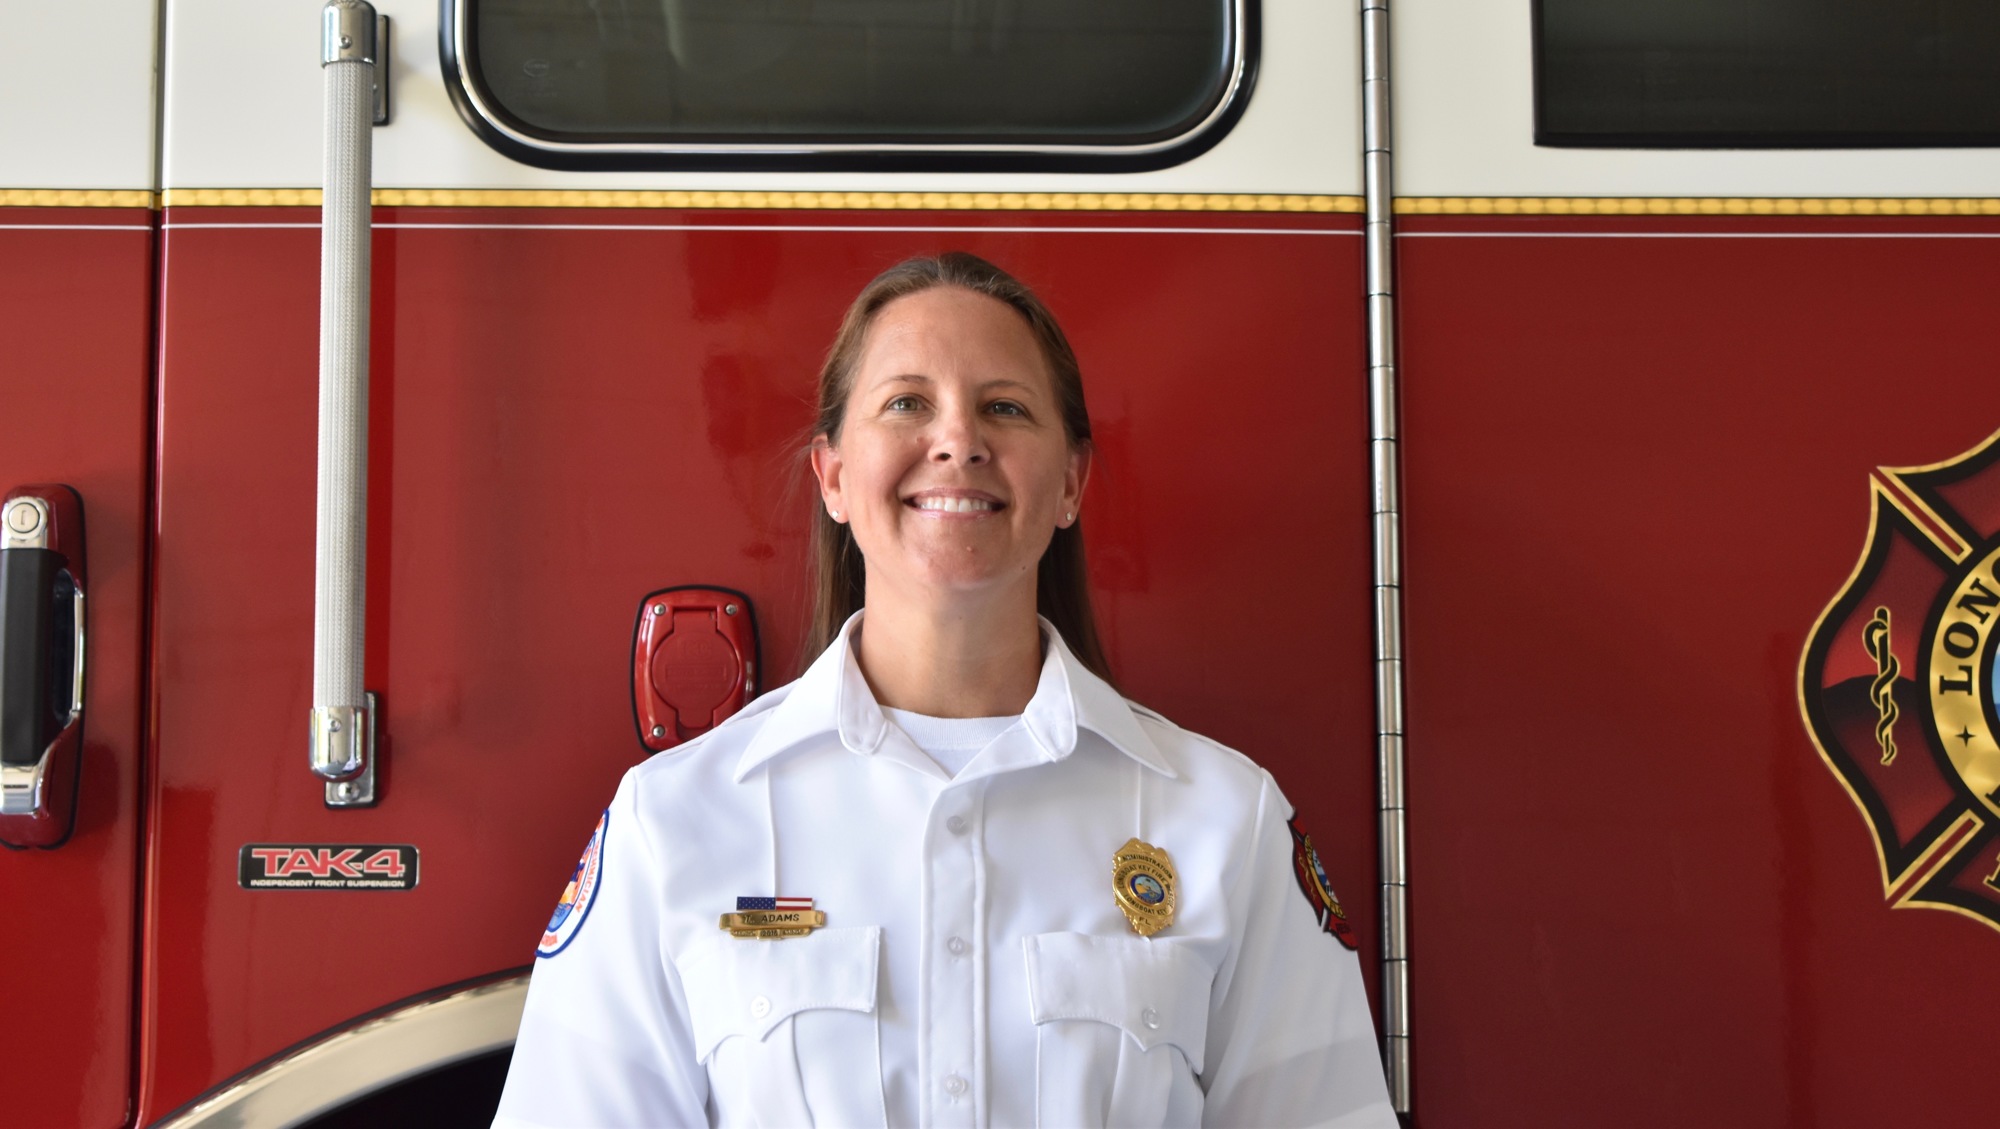 Adams didn't know she wanted to work in emergency services at first, but she's made a career of it since she began.